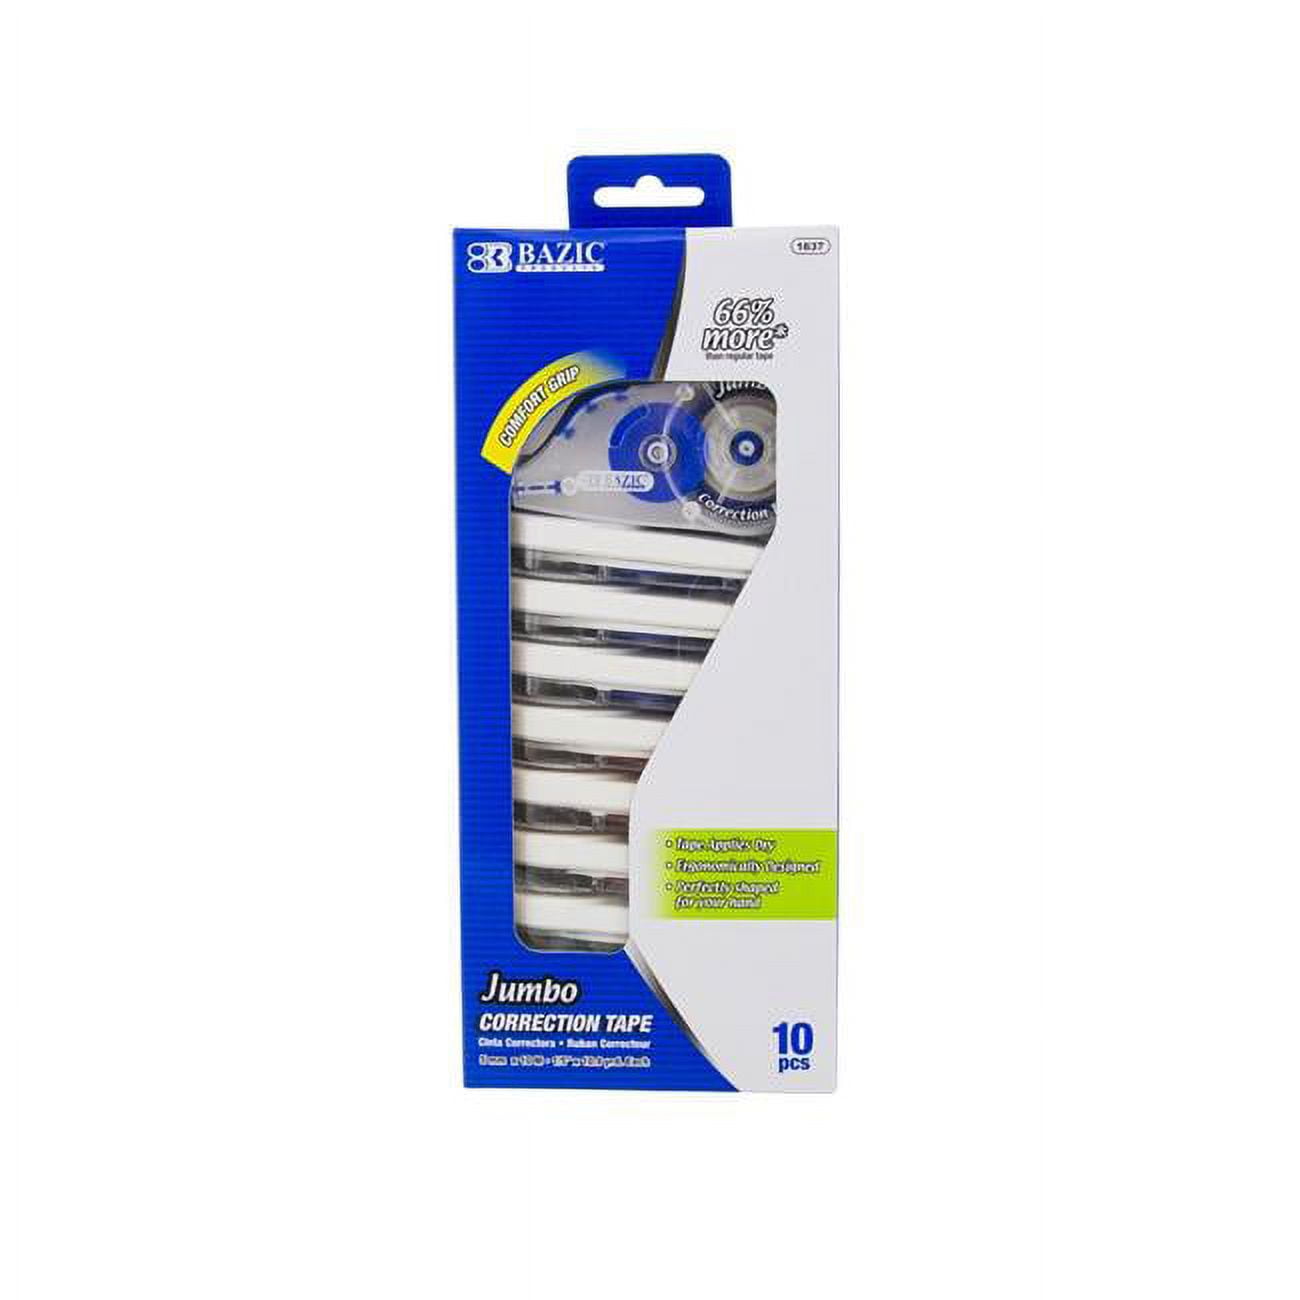 1637 5 Mm X 394 In. Jumbo Correction Tape With Grip, Pack Of 10 - Case Of 12